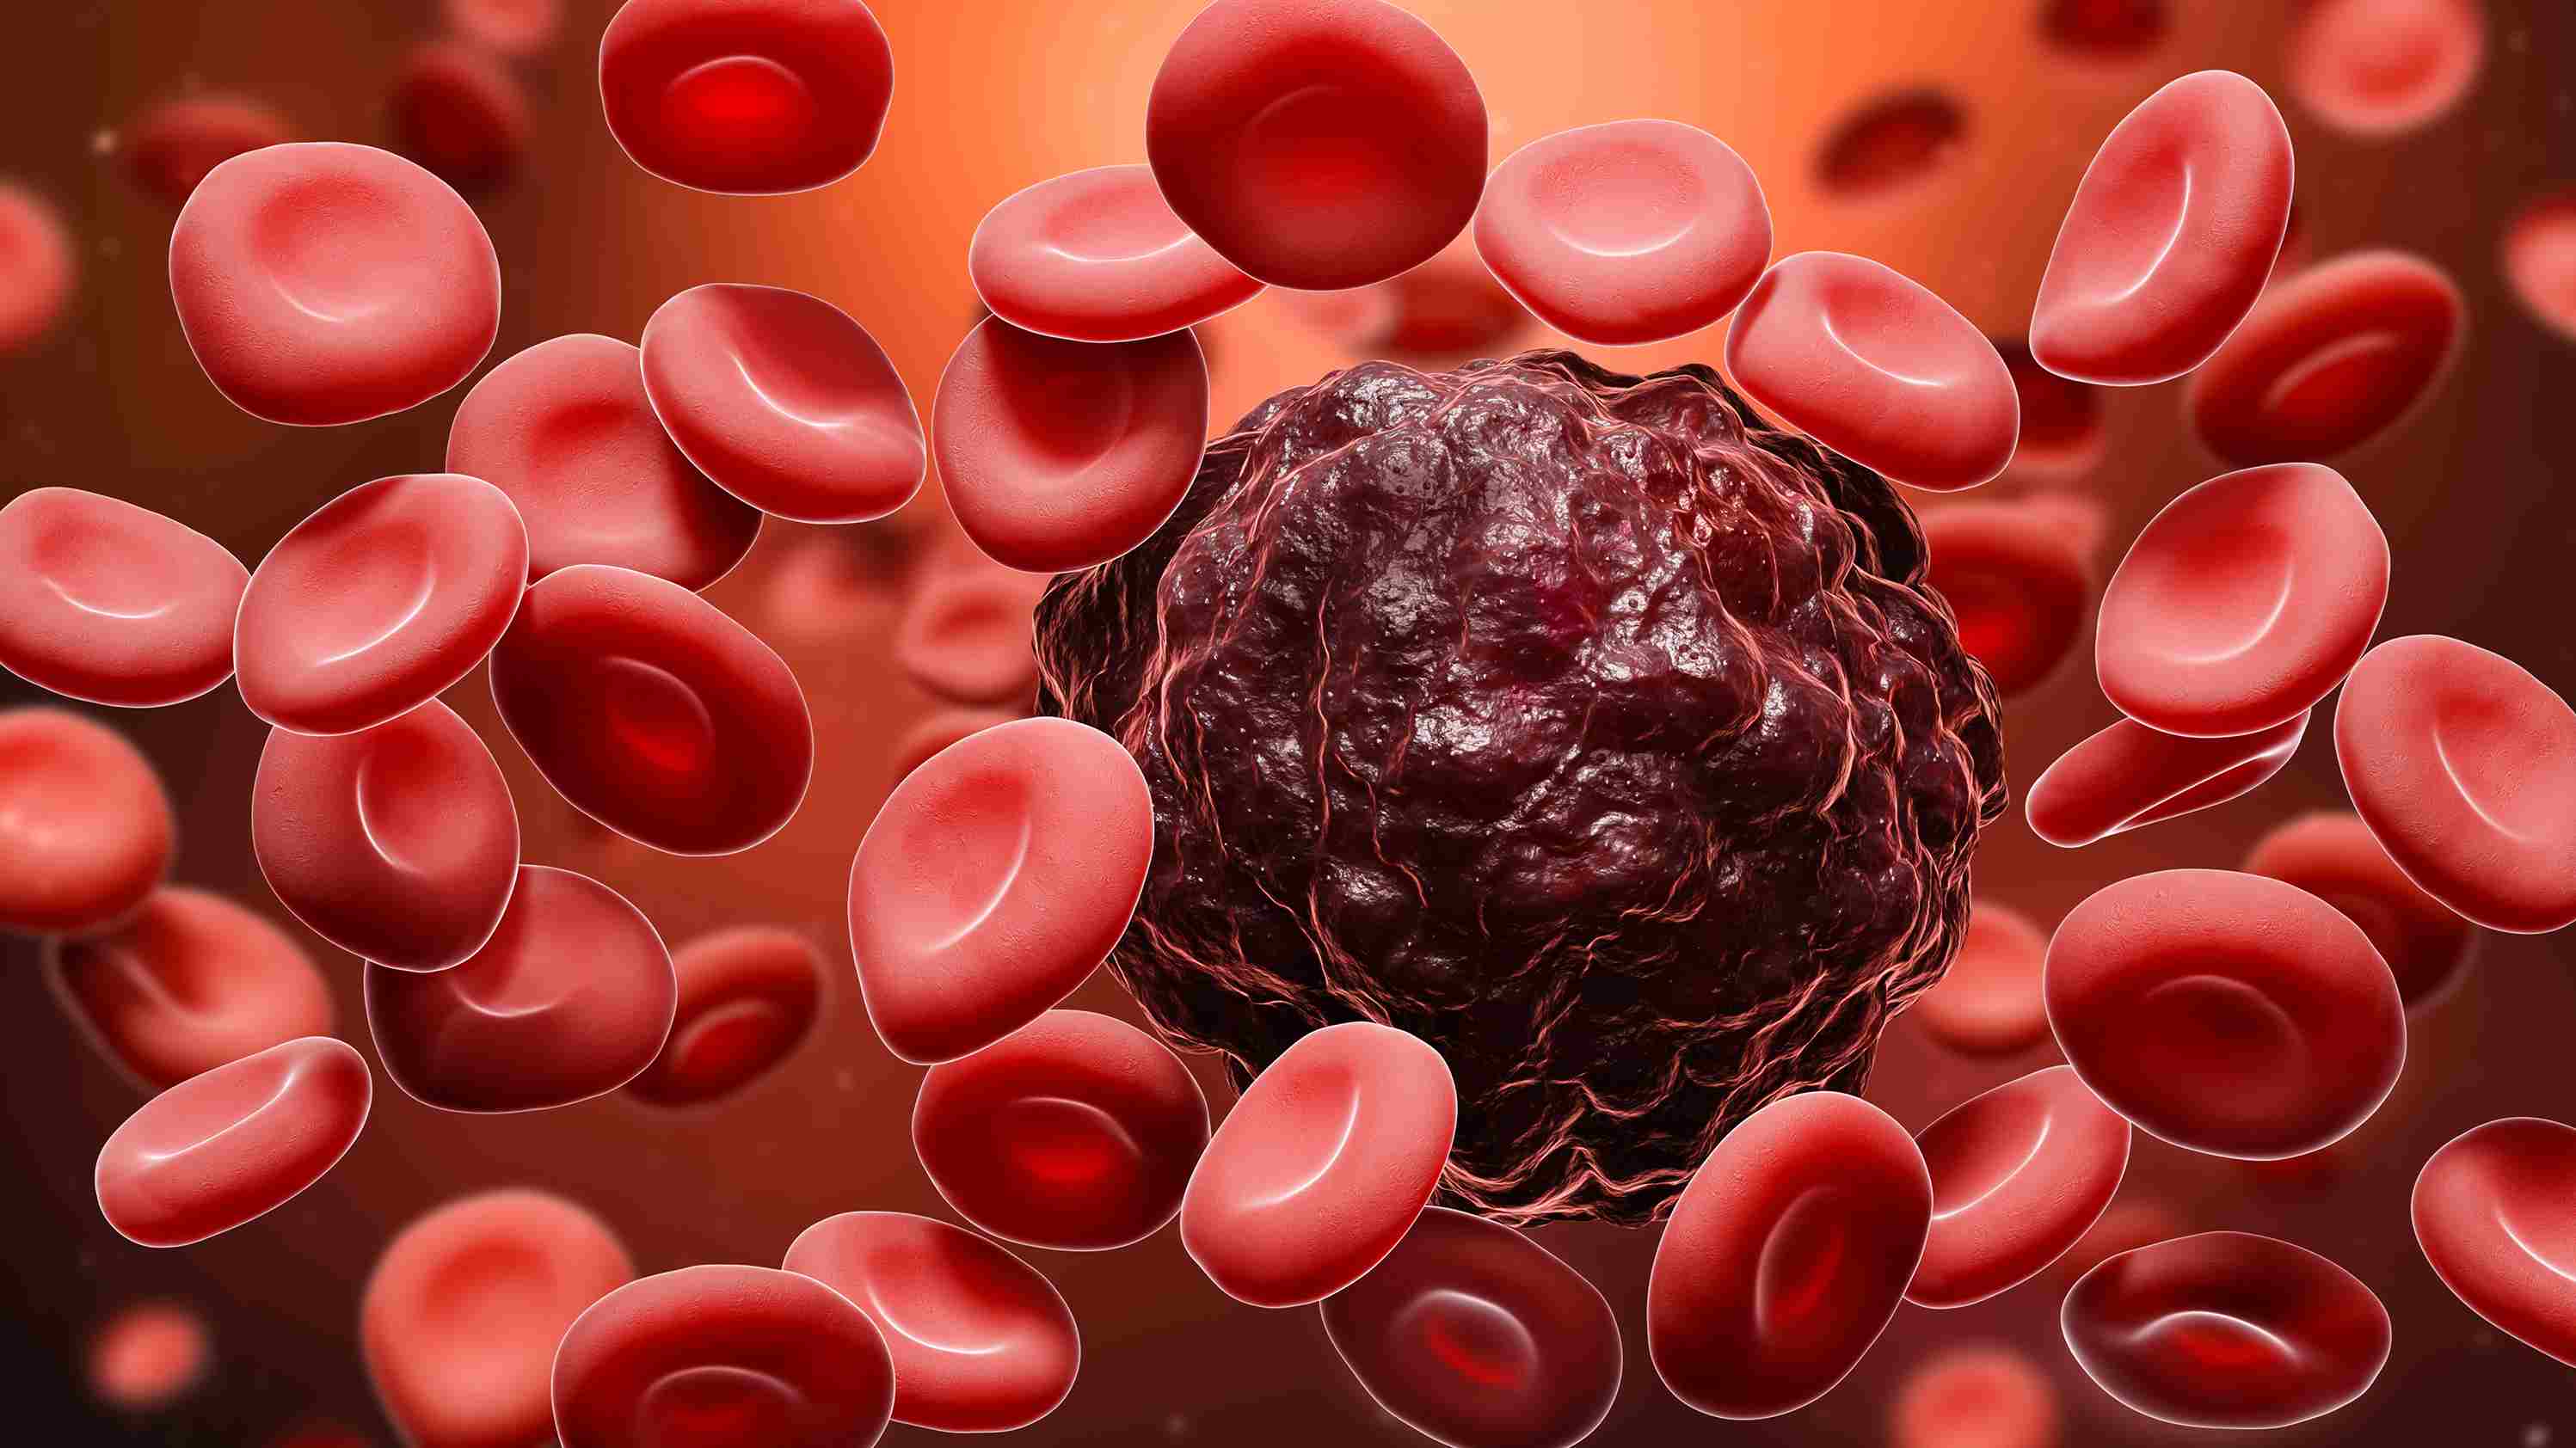 Blood Cancer Stage 4 Survival Rate and How To Increase It